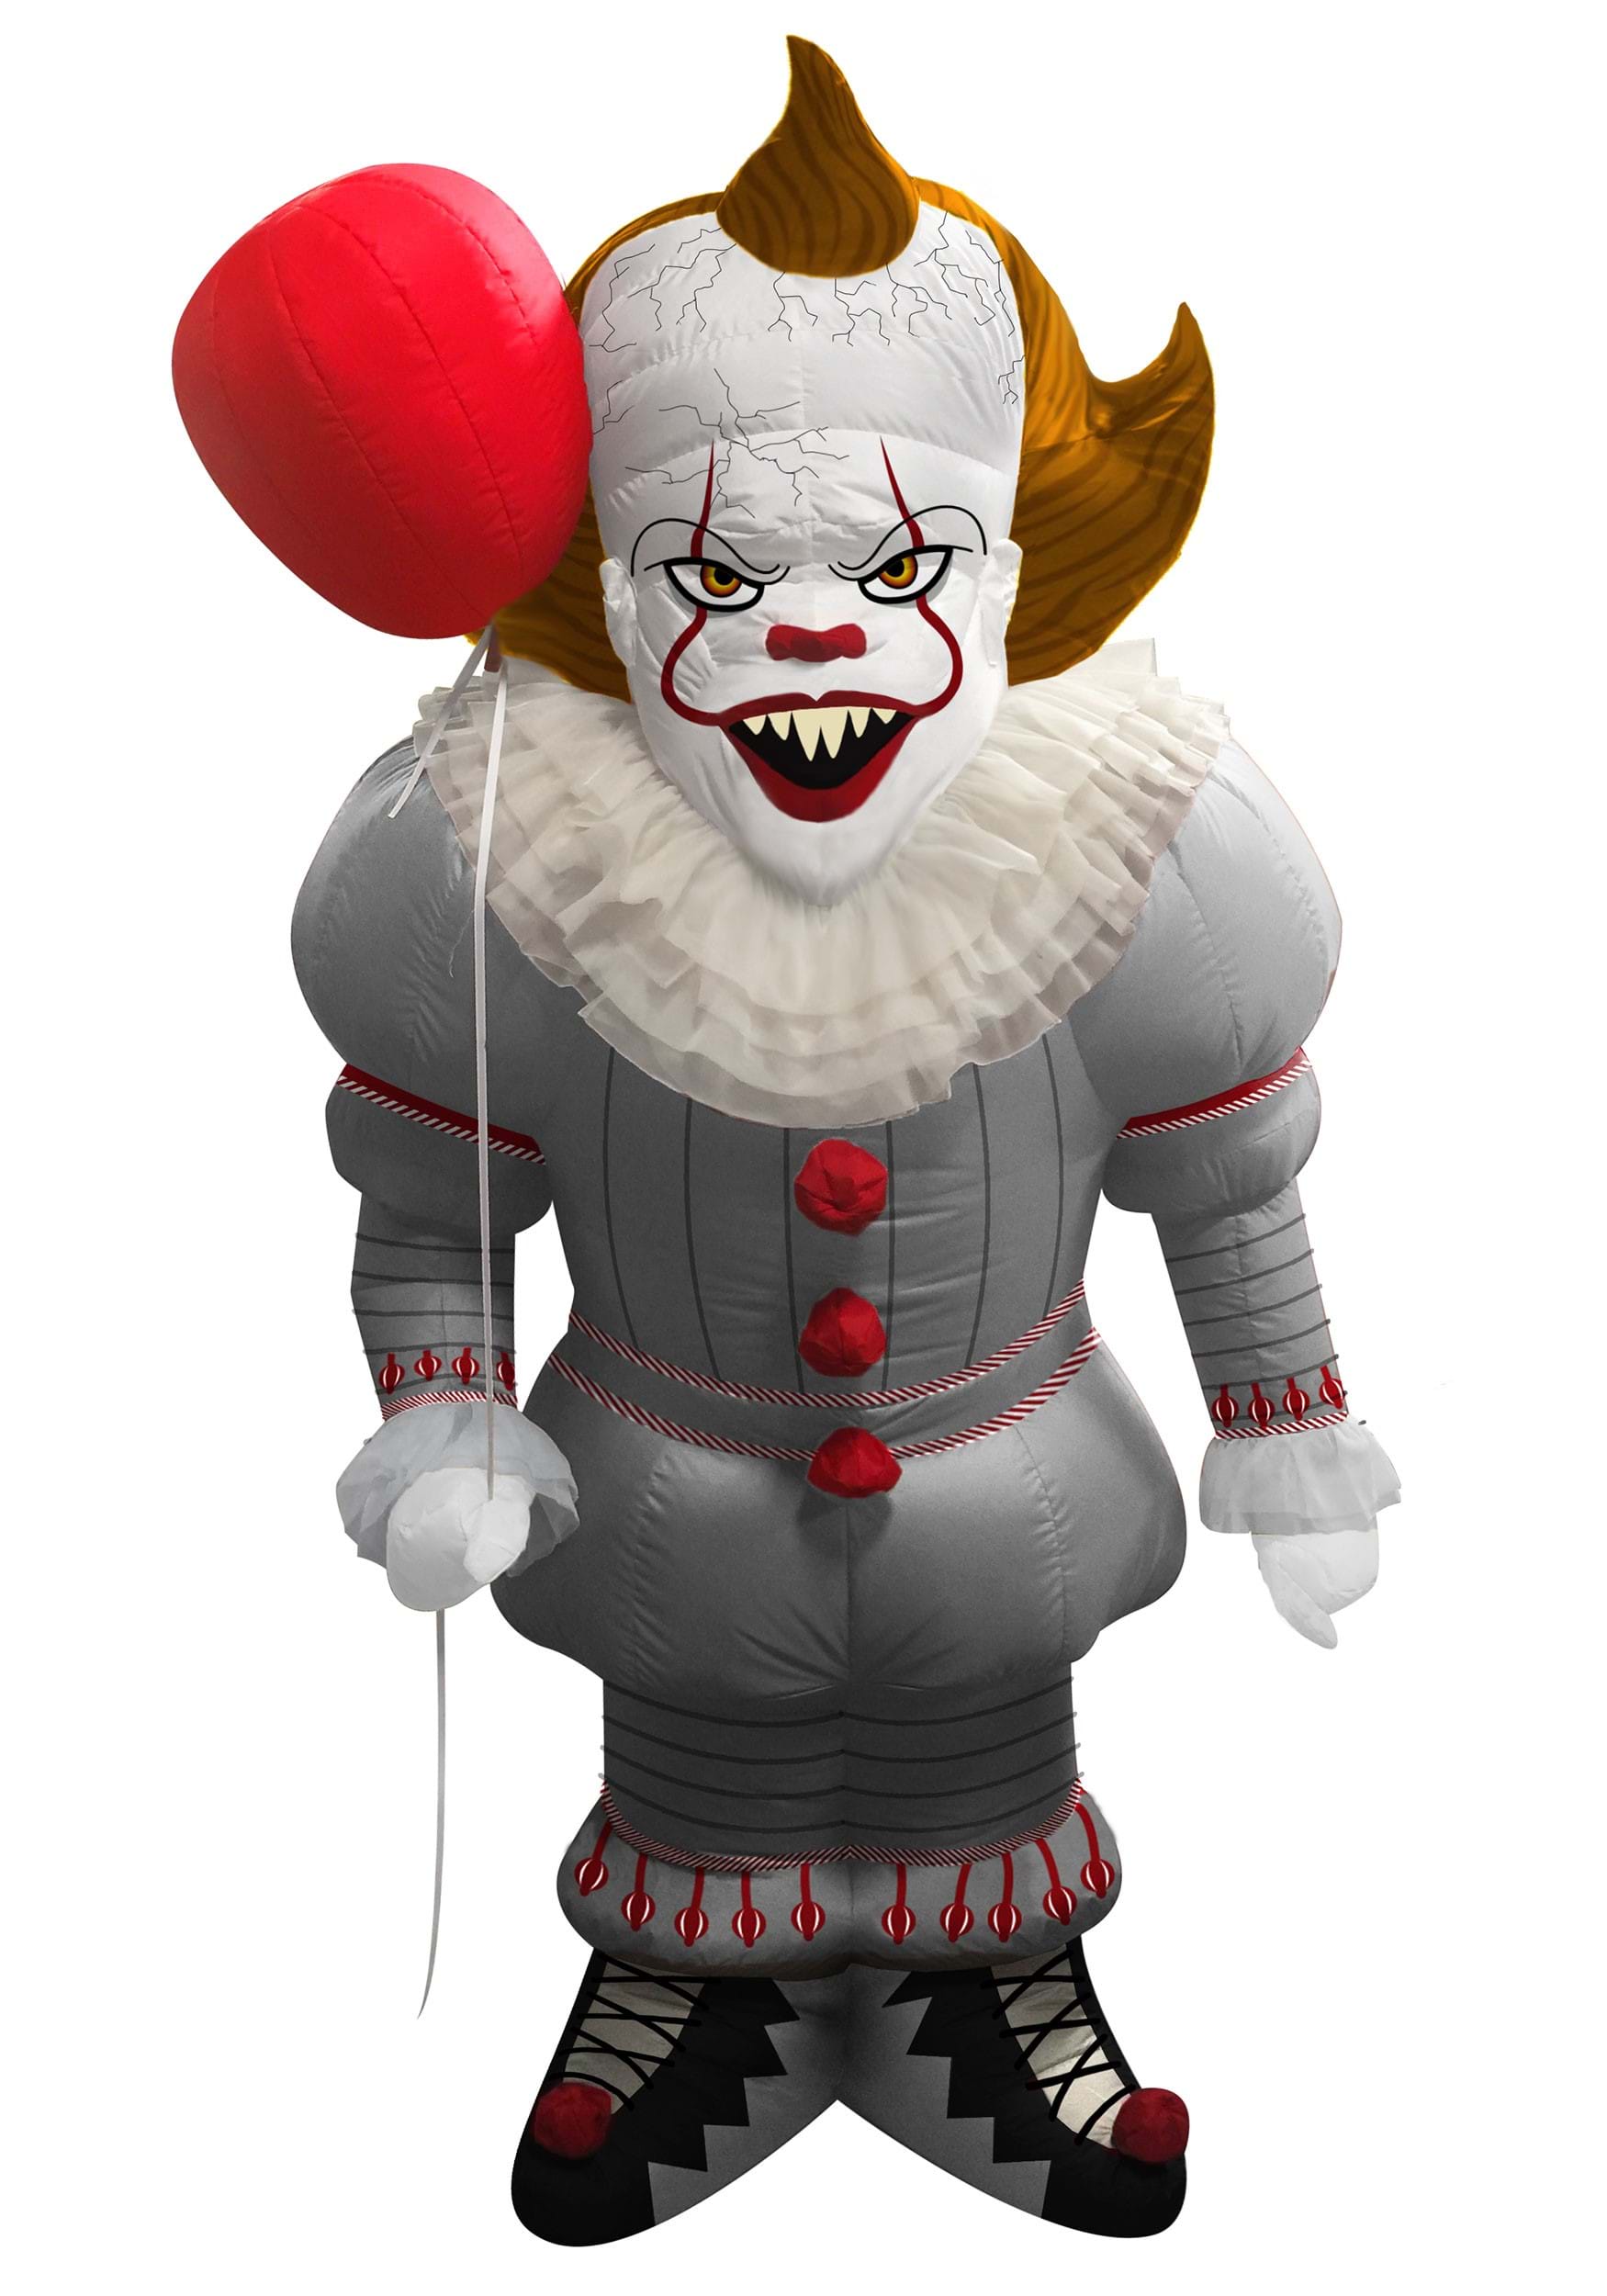 Image of 6FT IT Pennywise Inflatable Lawn Prop | Pennywise Decorations ID RU200395-ST